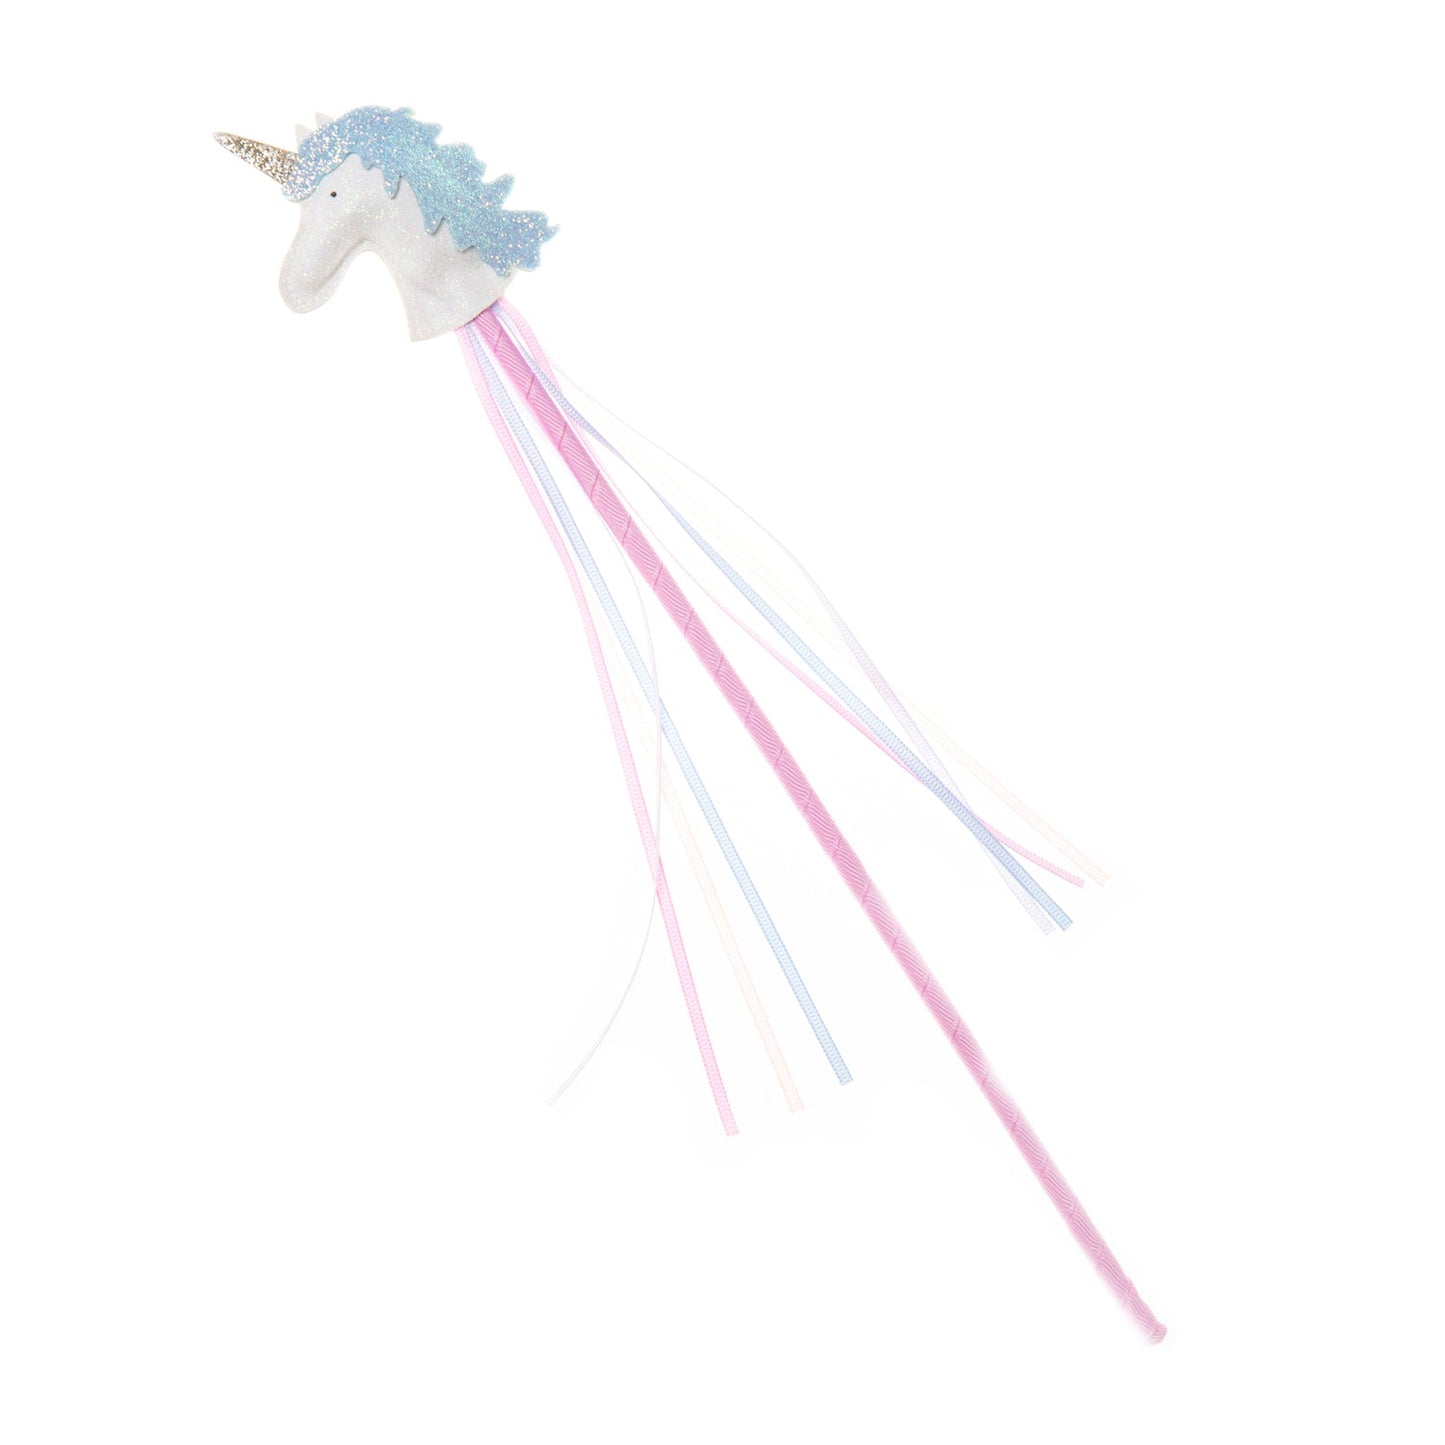 These magic wands are the perfect gift for any little one. Wave them around, dance with the ribbons flying through the air, and cast spells on any who need some magic - these imaginative play tools will be the hit! Rockahula sold at Thread Spun.